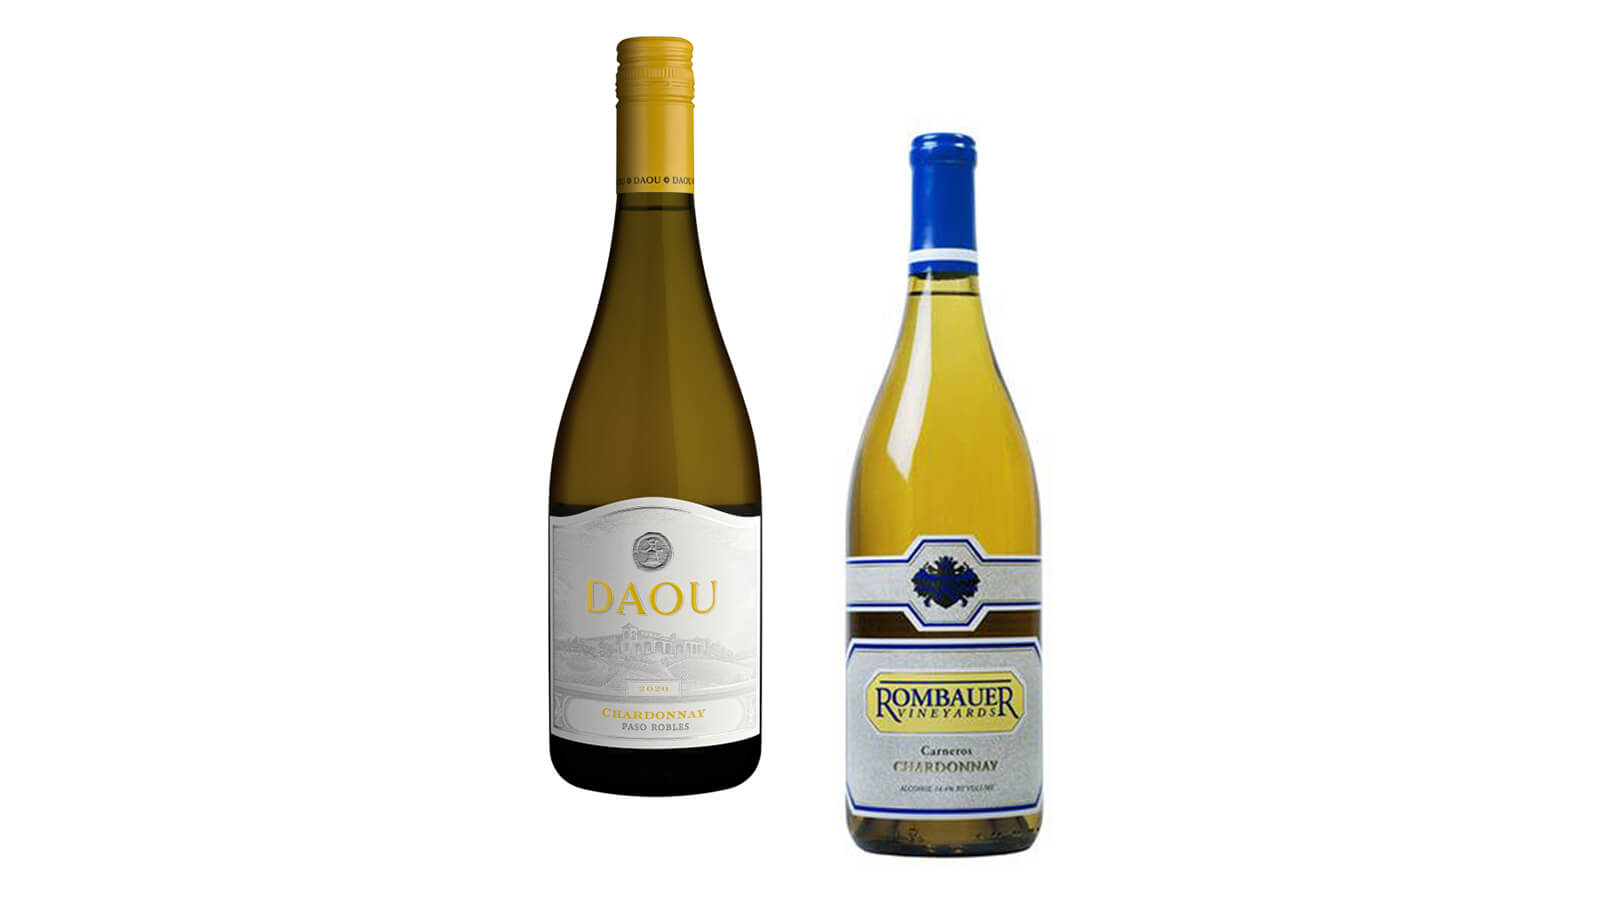 Daou Paso Robles Chardonnay and Rombauer Chardonnay